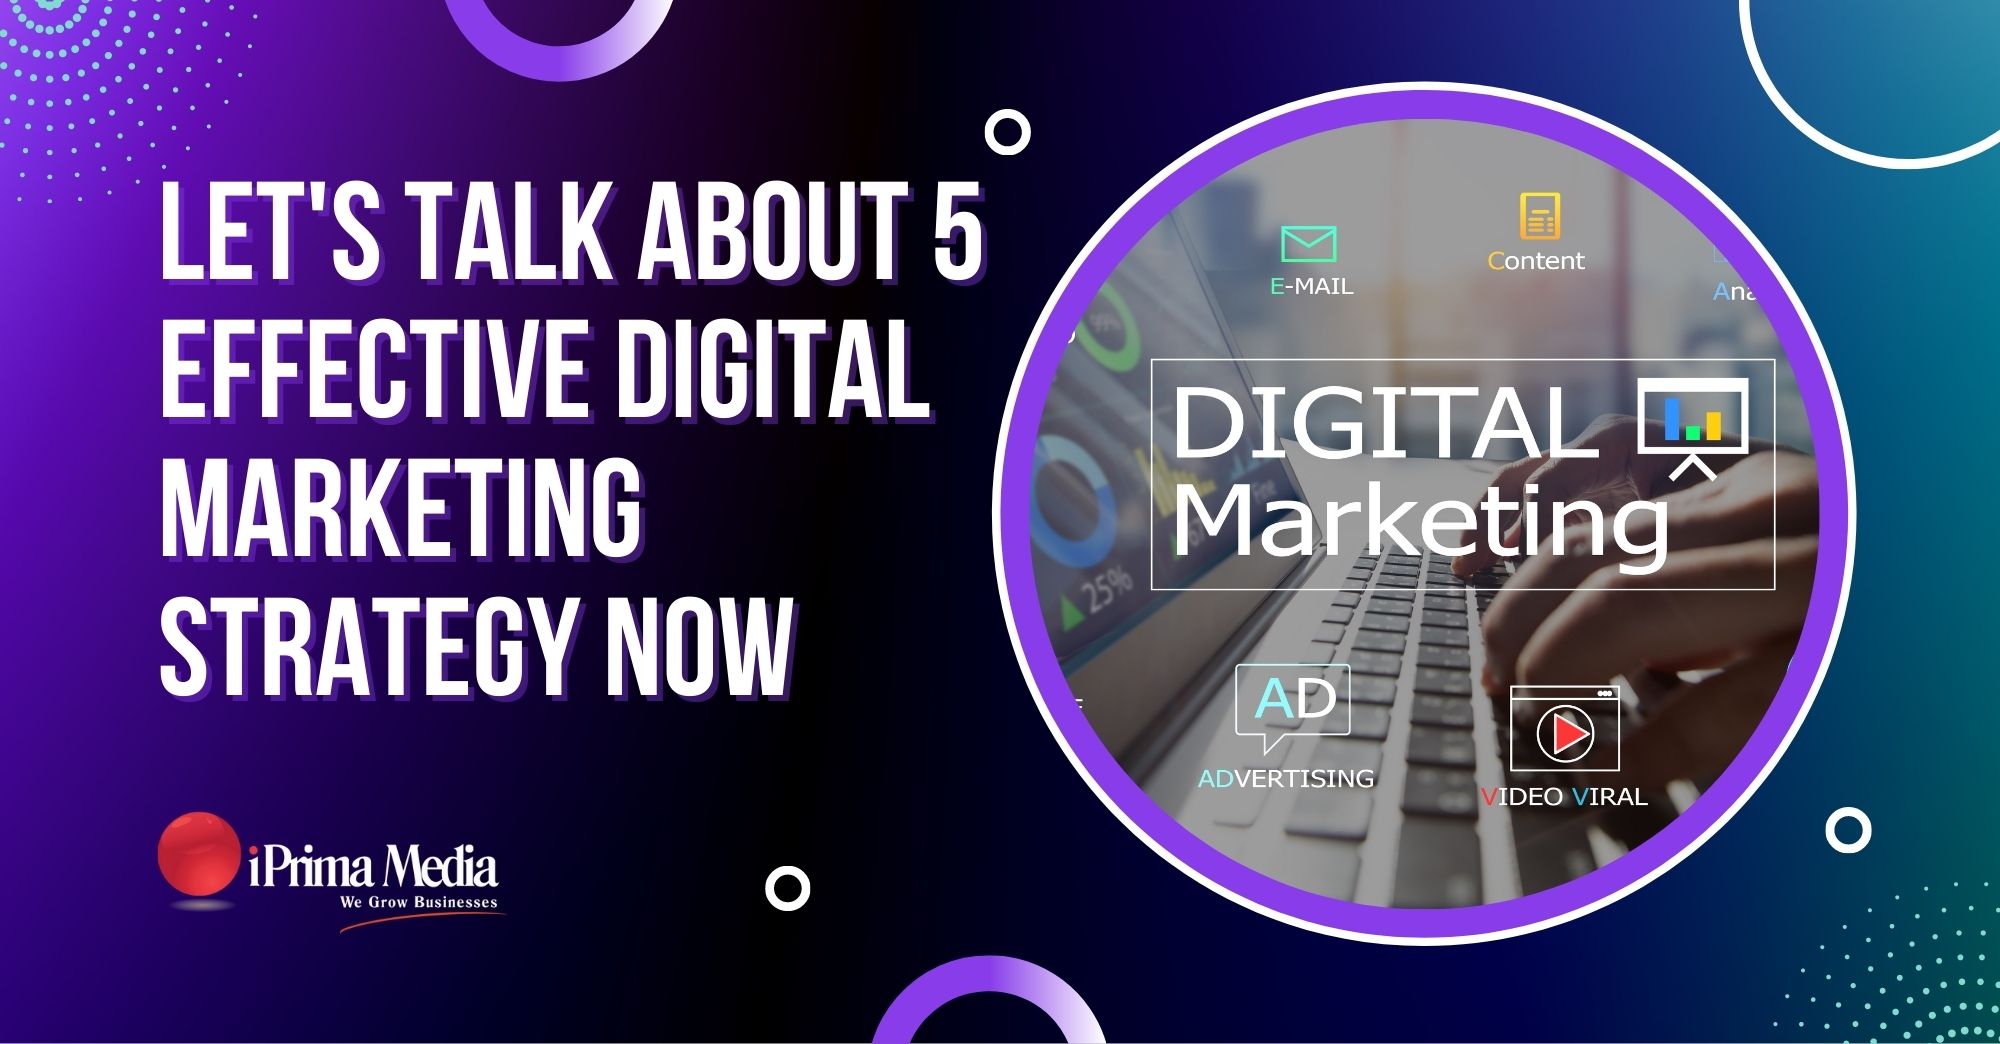 Lets-Talk-About-5-Effective-Digital-Marketing-Strategy-Now.jpg